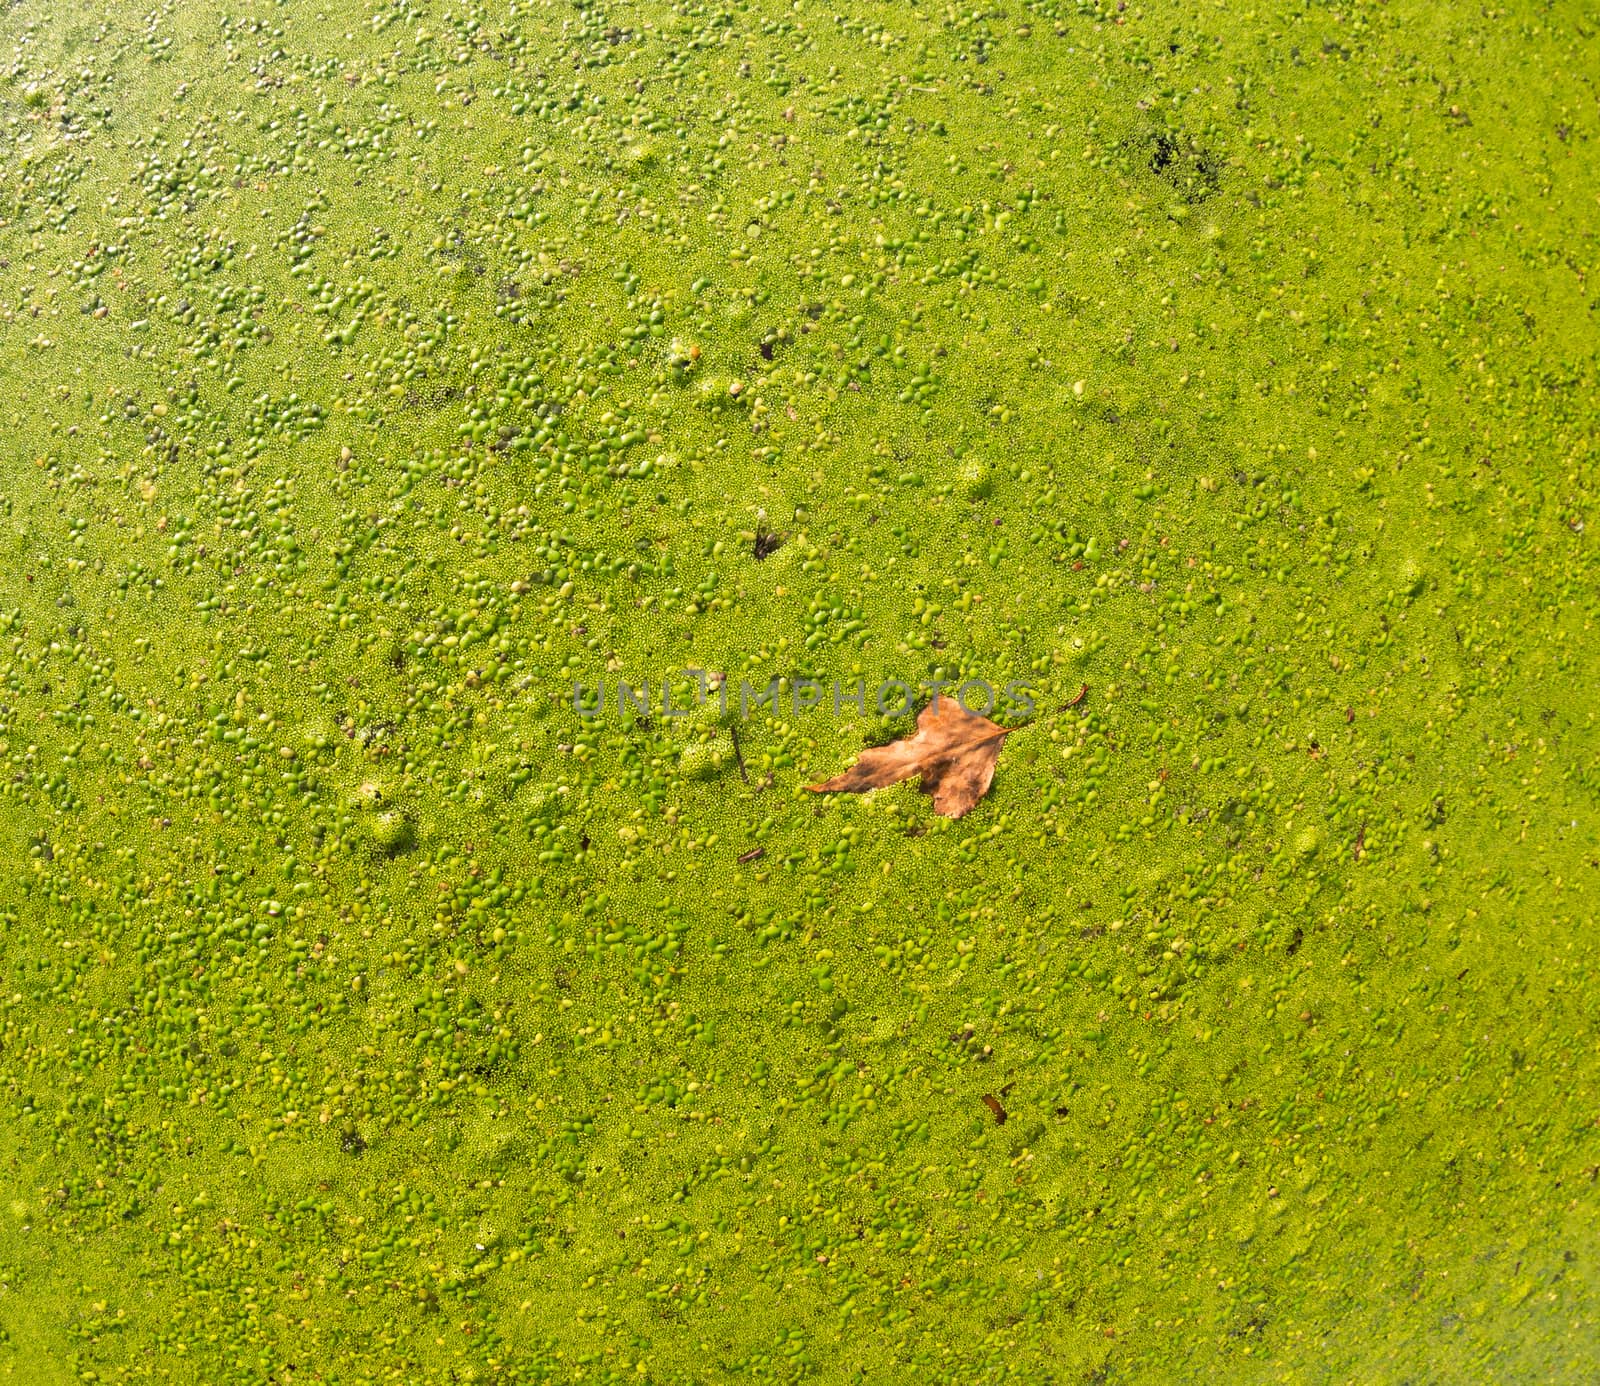 The surface of the swamped pond covered with duckweed, in which floats single small leaf on a sunny summer day